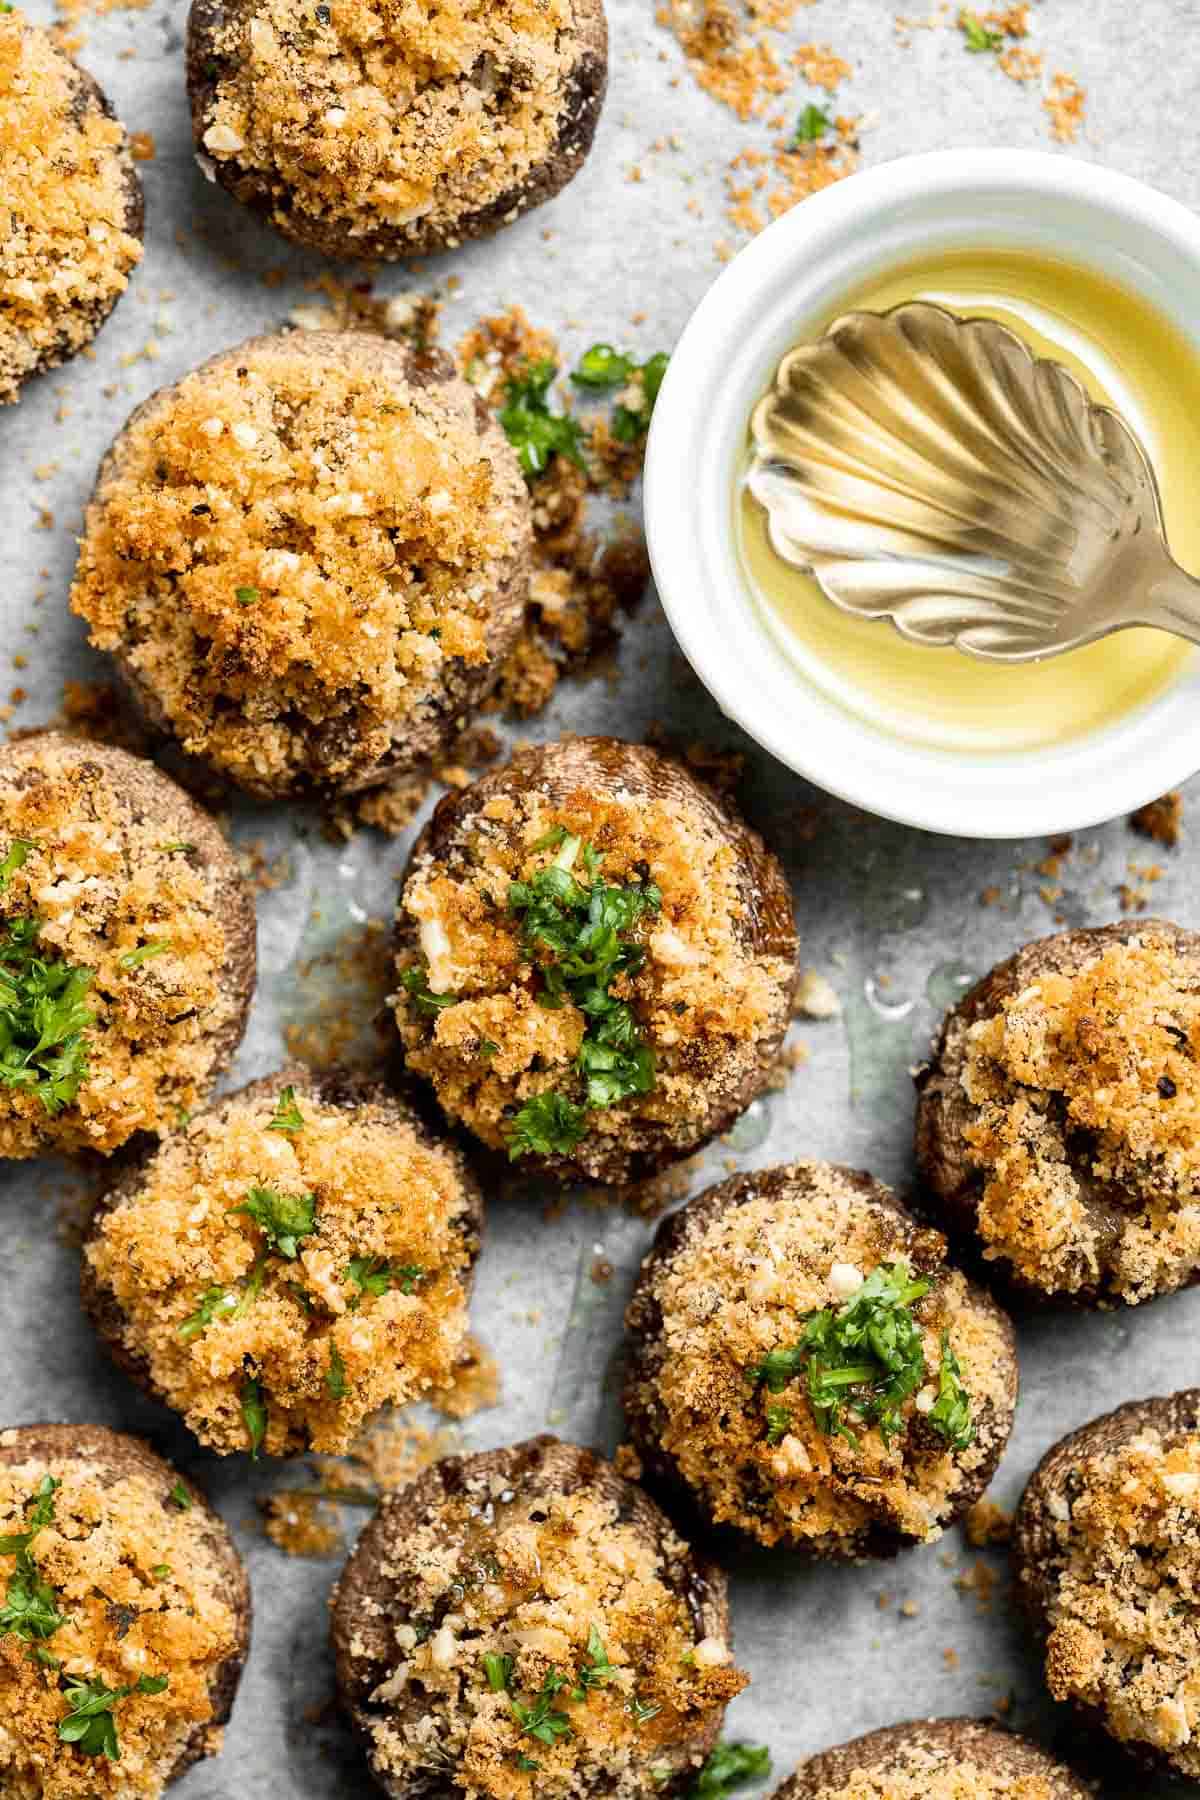 Vegetarian stuffed mushrooms are a delicious, flavorful, healthy, and nutritious appetizer. Plus, quick and easy to make in under 30 minutes including prep! | aheadofthyme.com